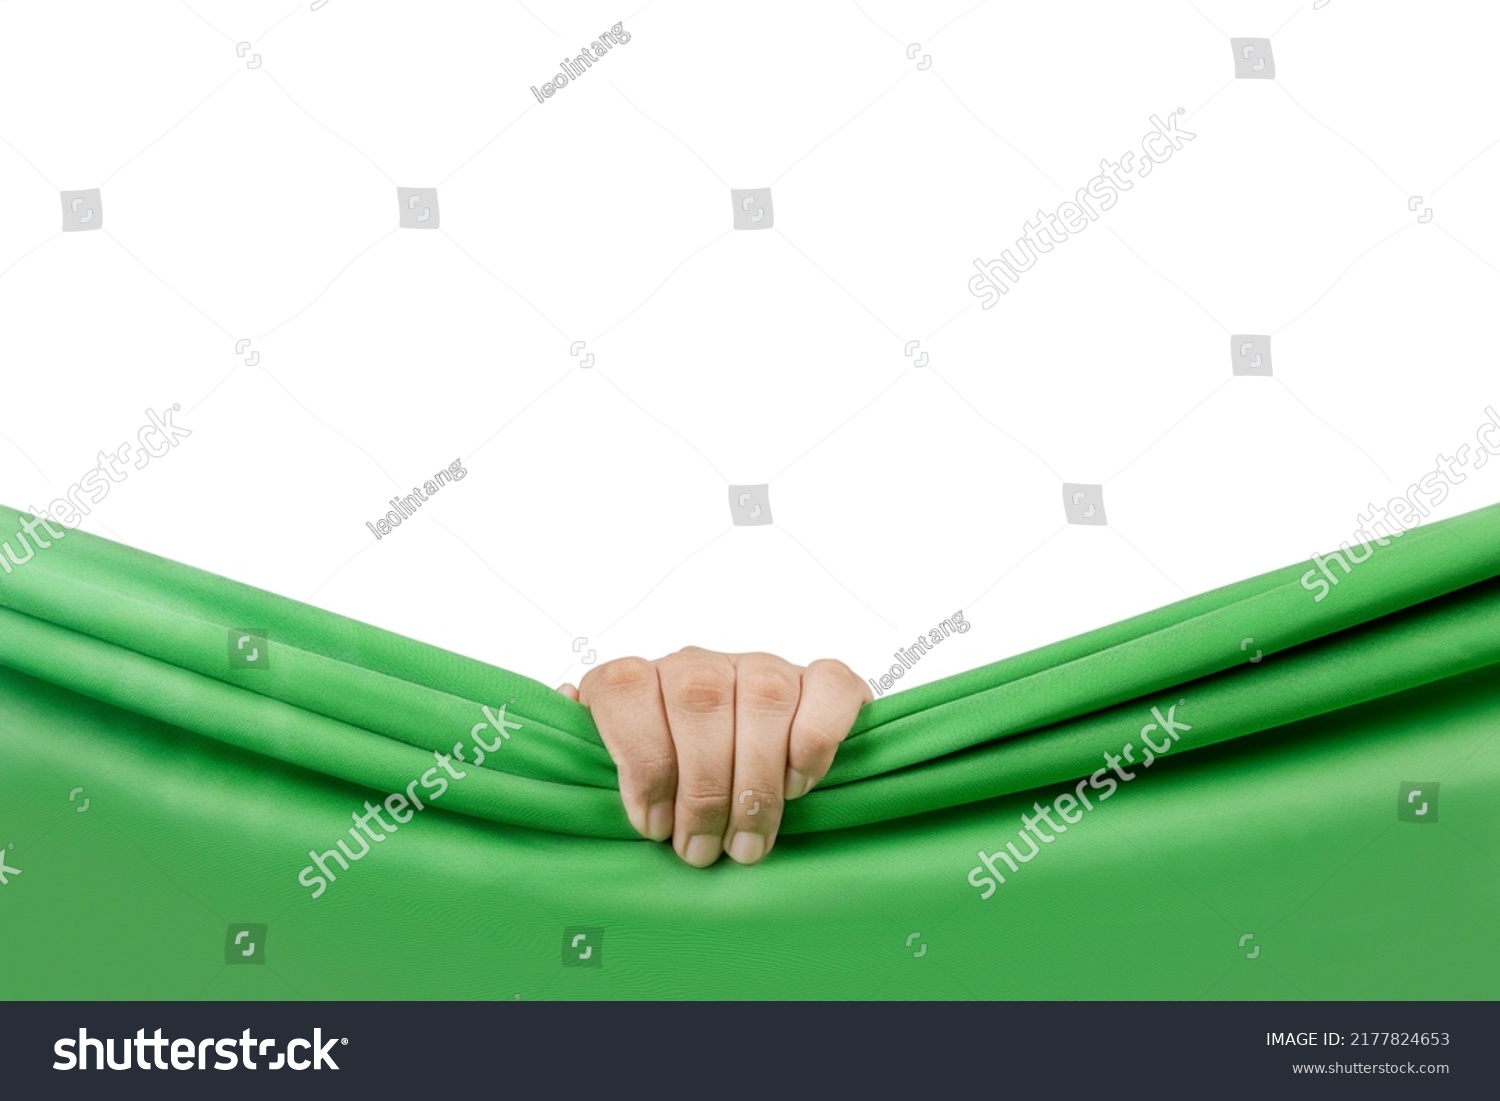 Human hand opening green curtain with white background #2177824653